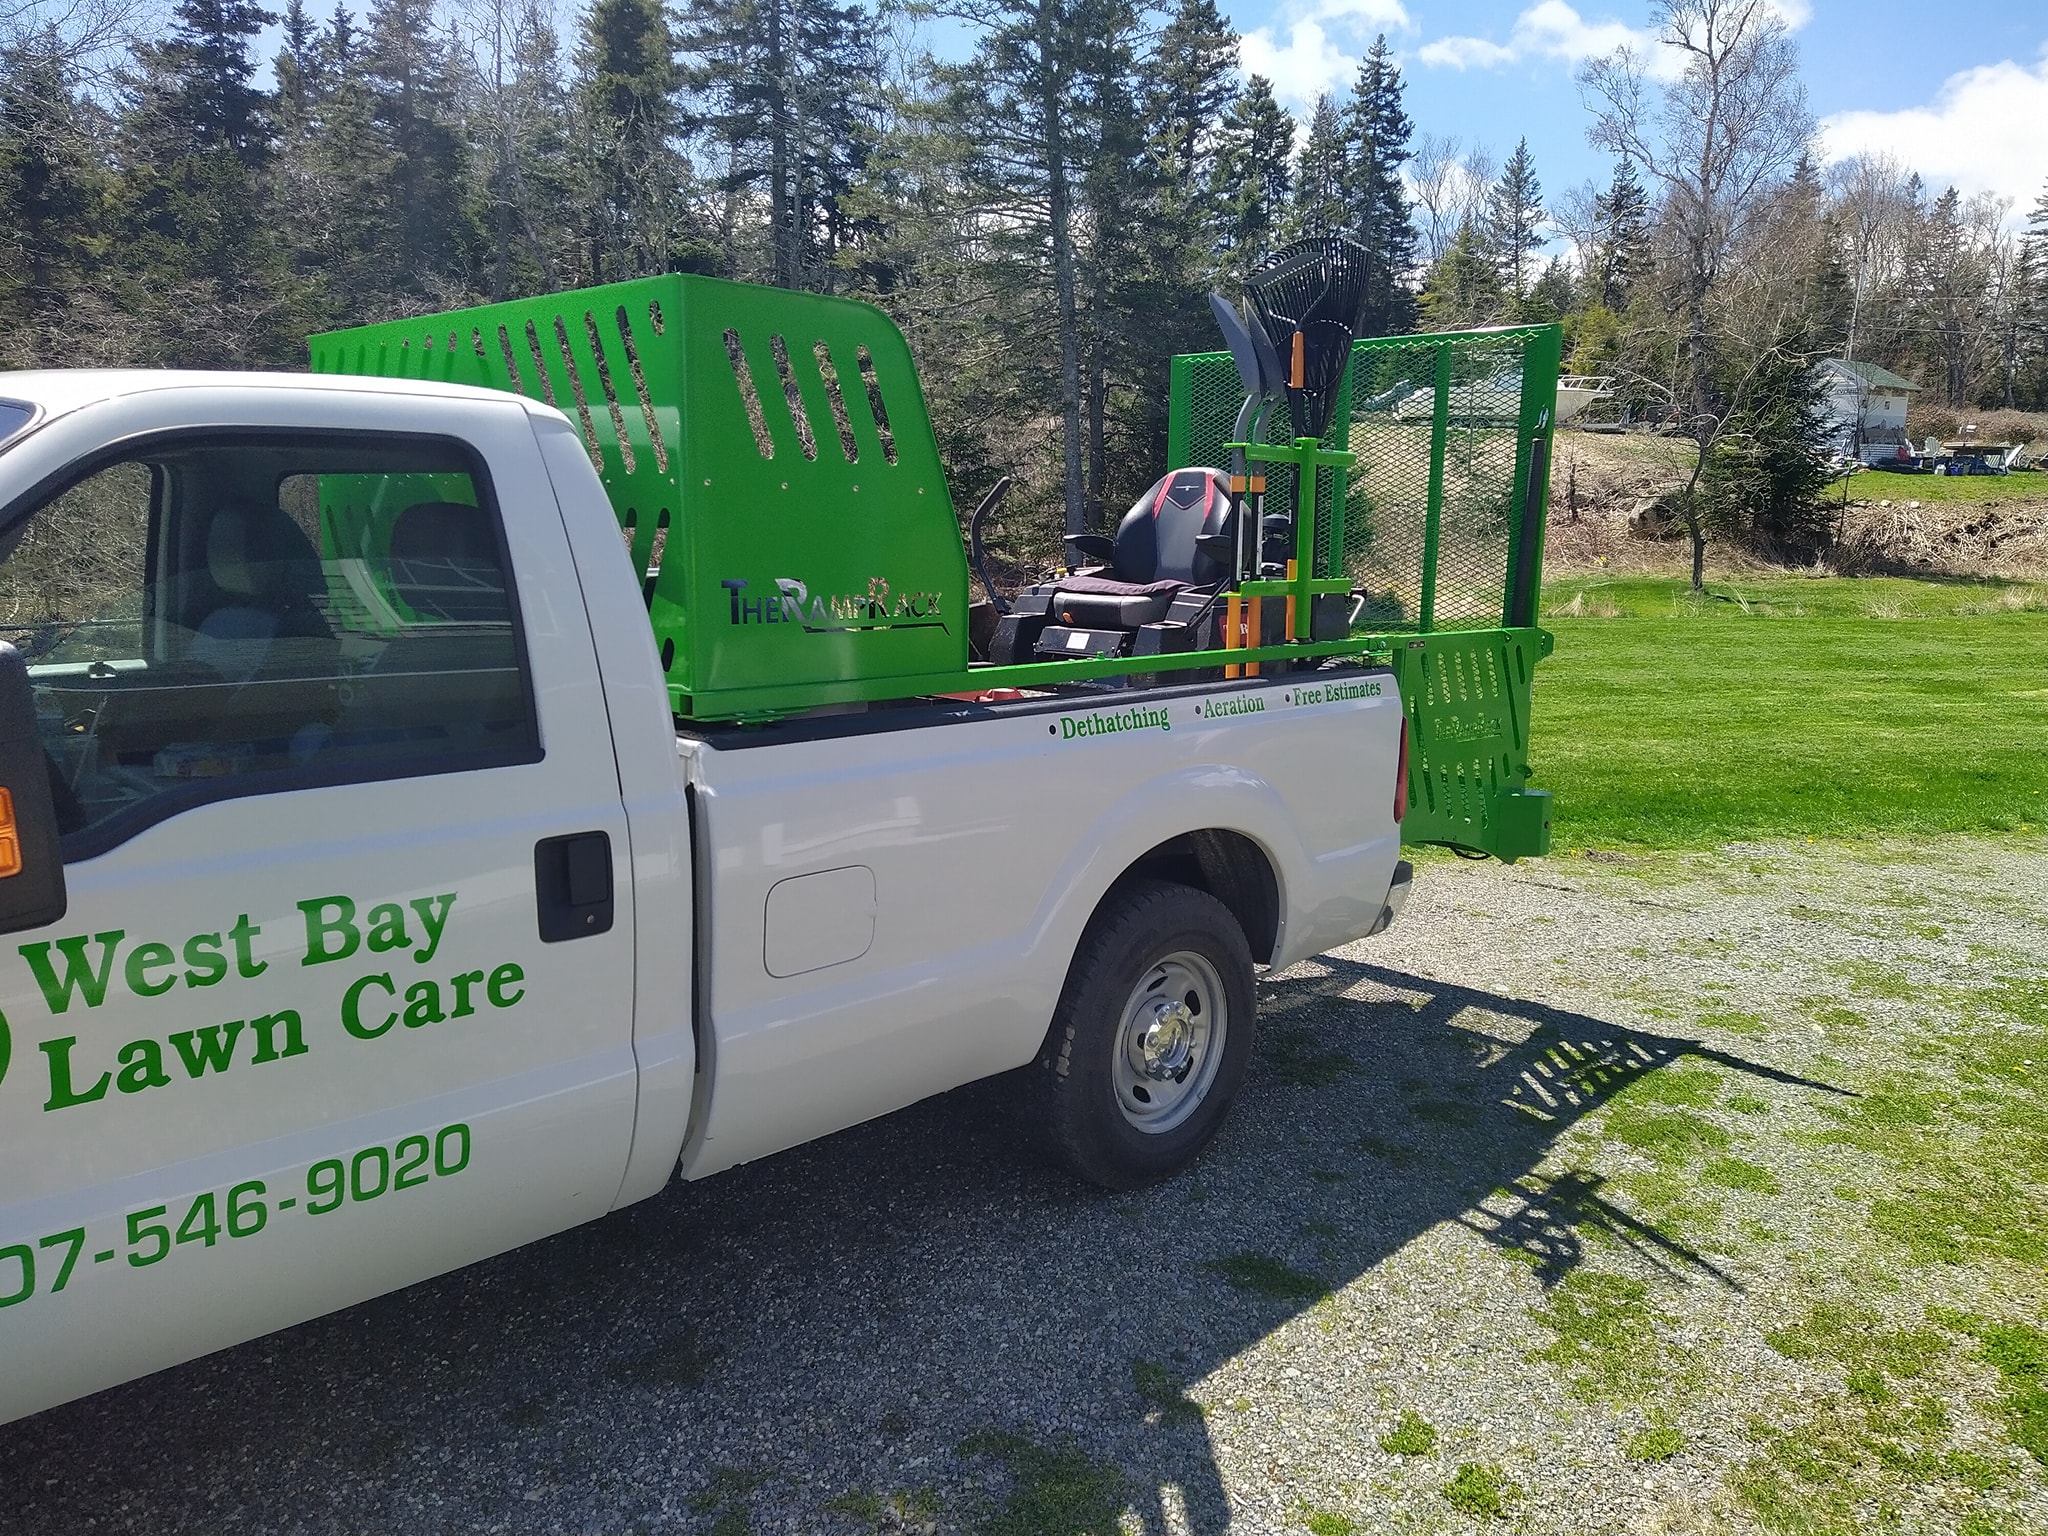 Truck and Landscape Machines - West Bay Lawn Care - Gouldsboro - Maine SBDC